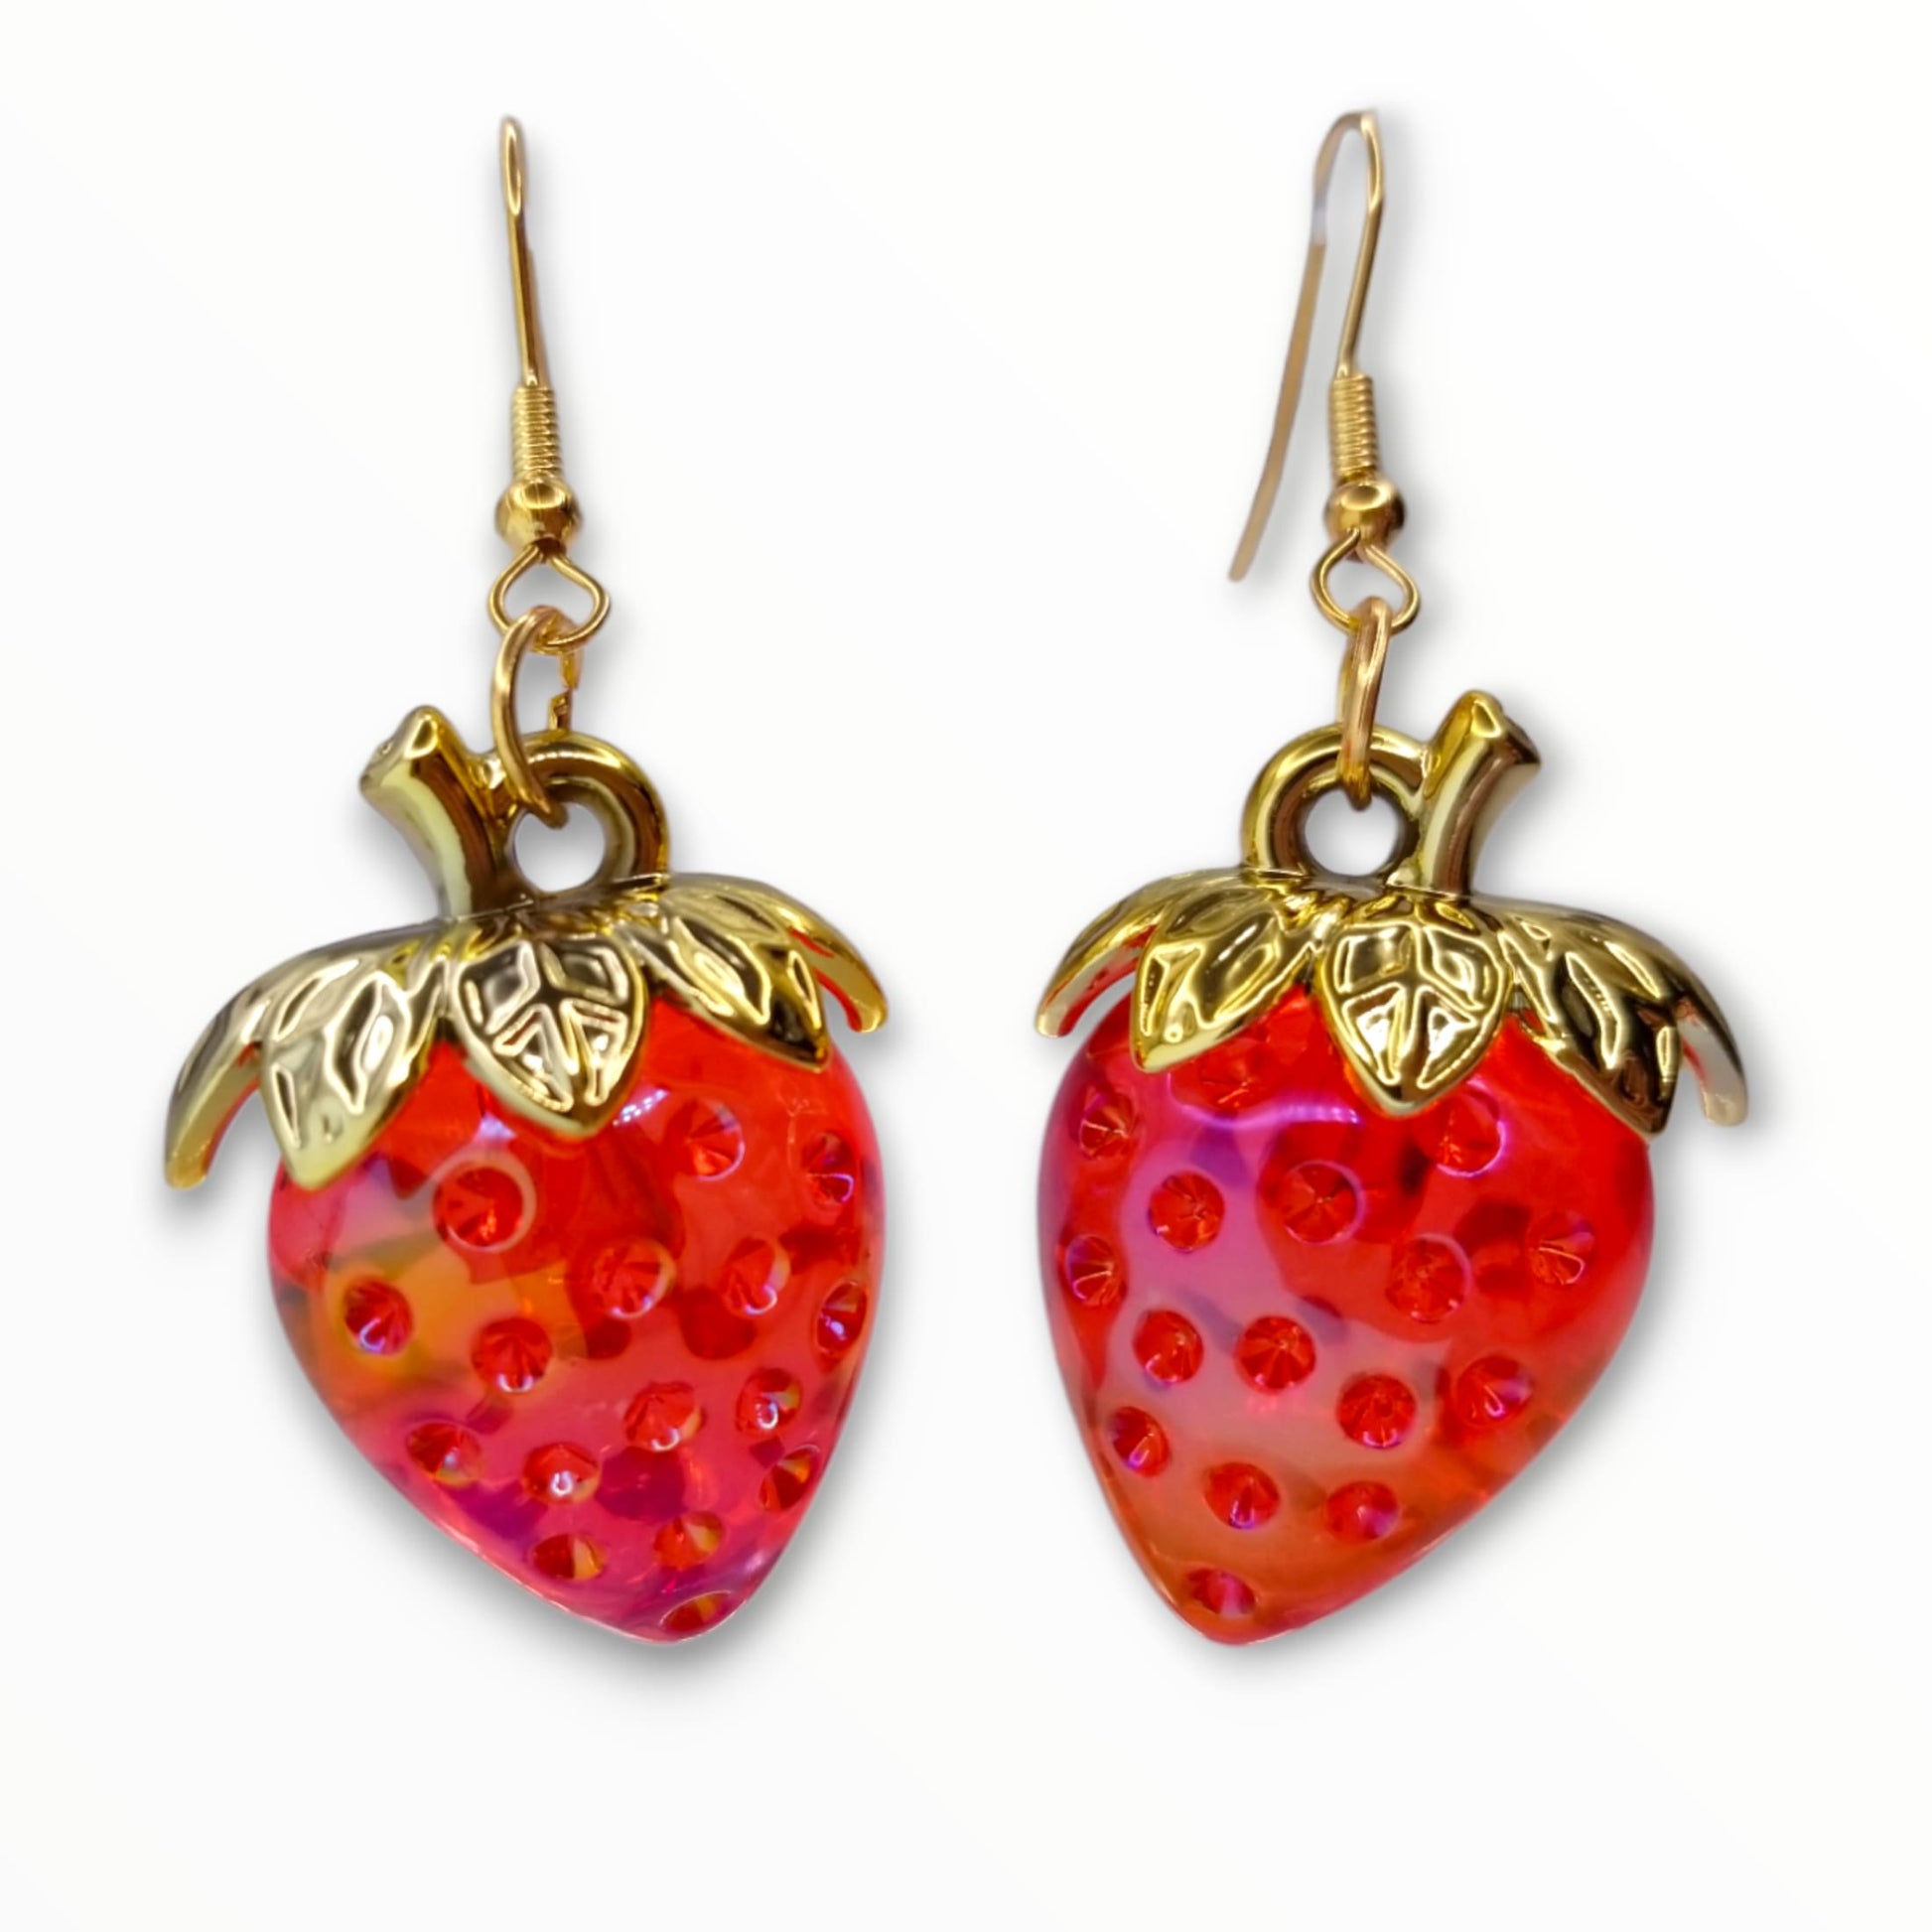 Strawberry Earrings from Confetti Kitty, Only 7.99